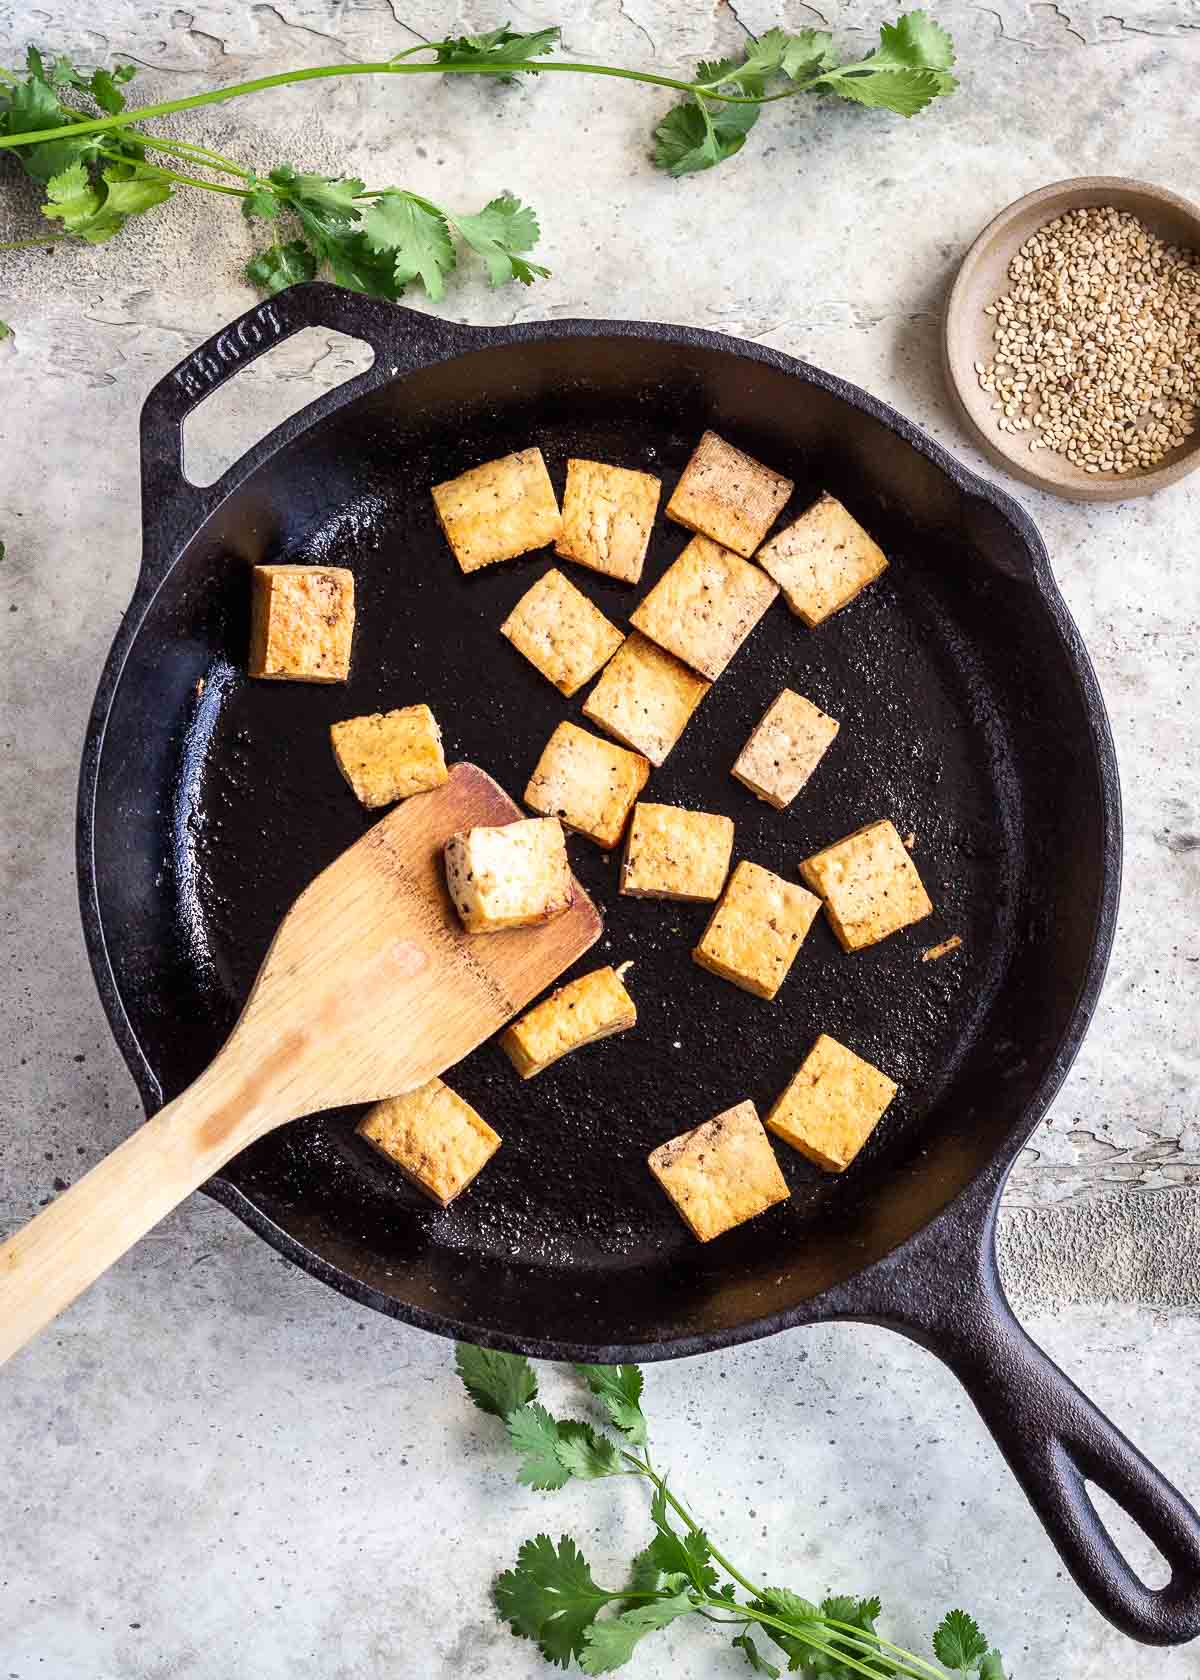 Tofu in a cast iron pan being flipped with a wooden spatula.